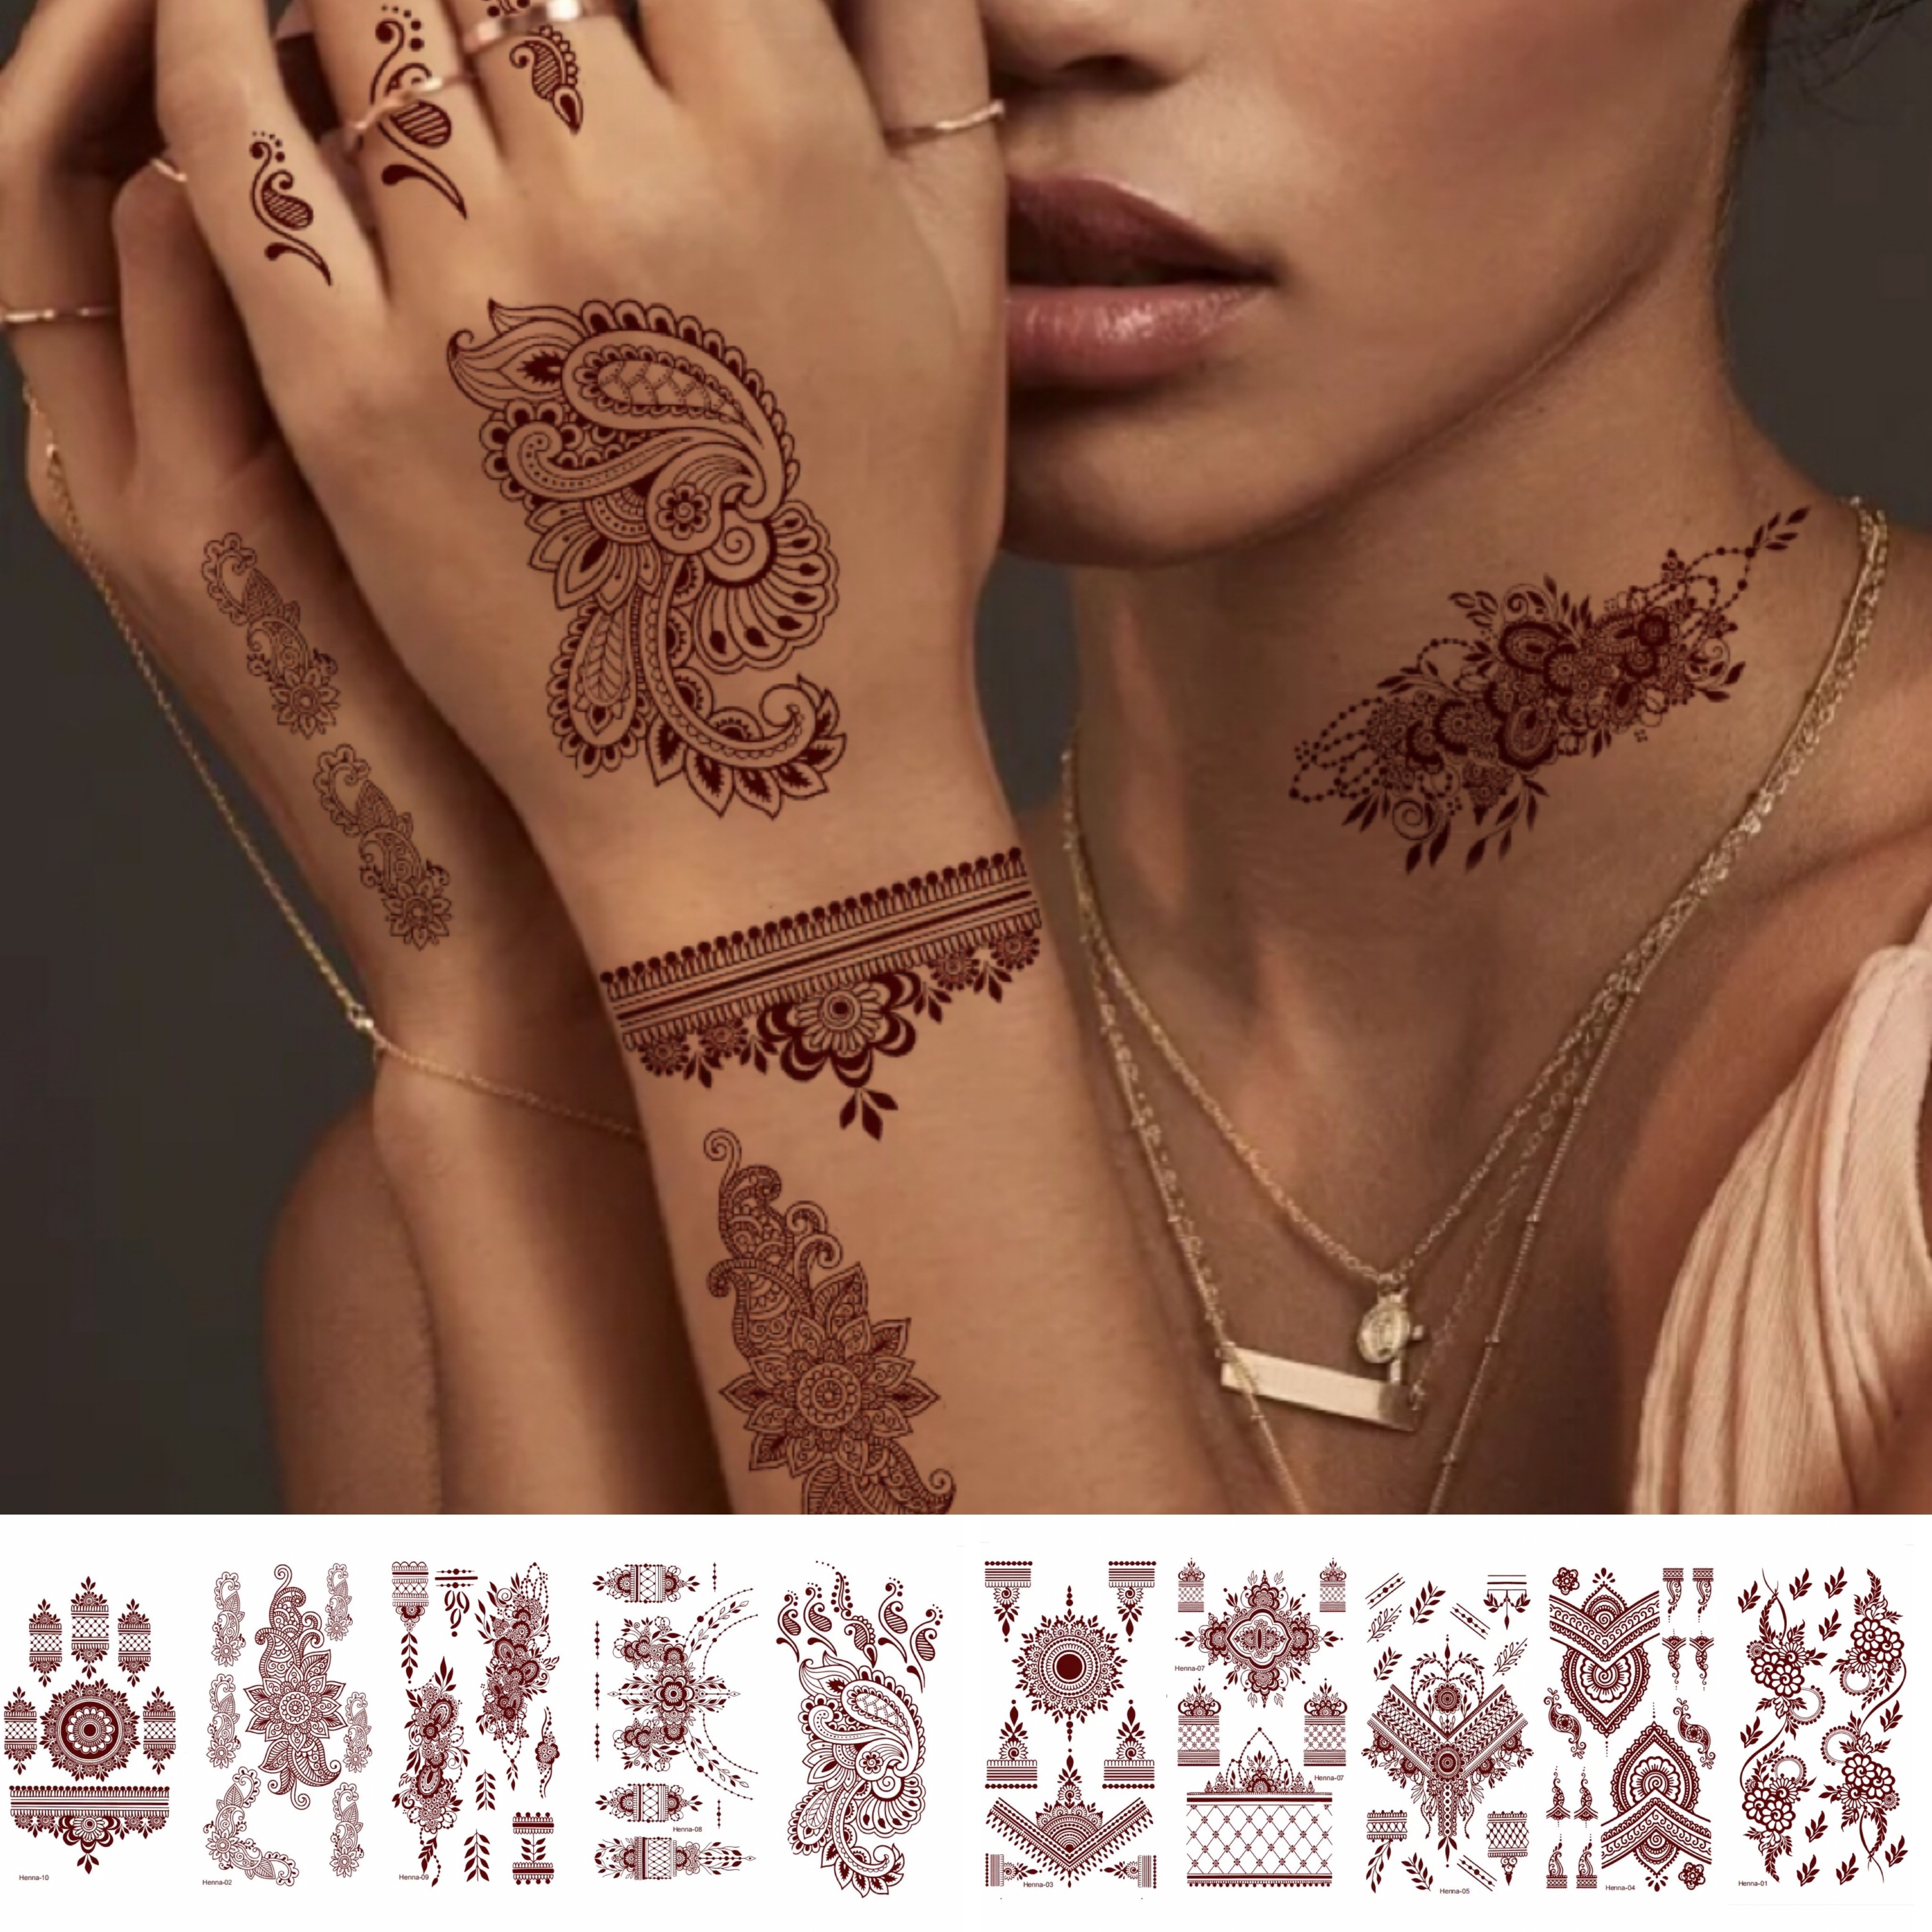 

Retro Flower Fake Tattoos, Waterproof Sweatproof Stickers For Women, Temporary Tattoos For Holidays, Parties, Fingers And Hands Back, Fashion Non-toxic High Quality Stickers